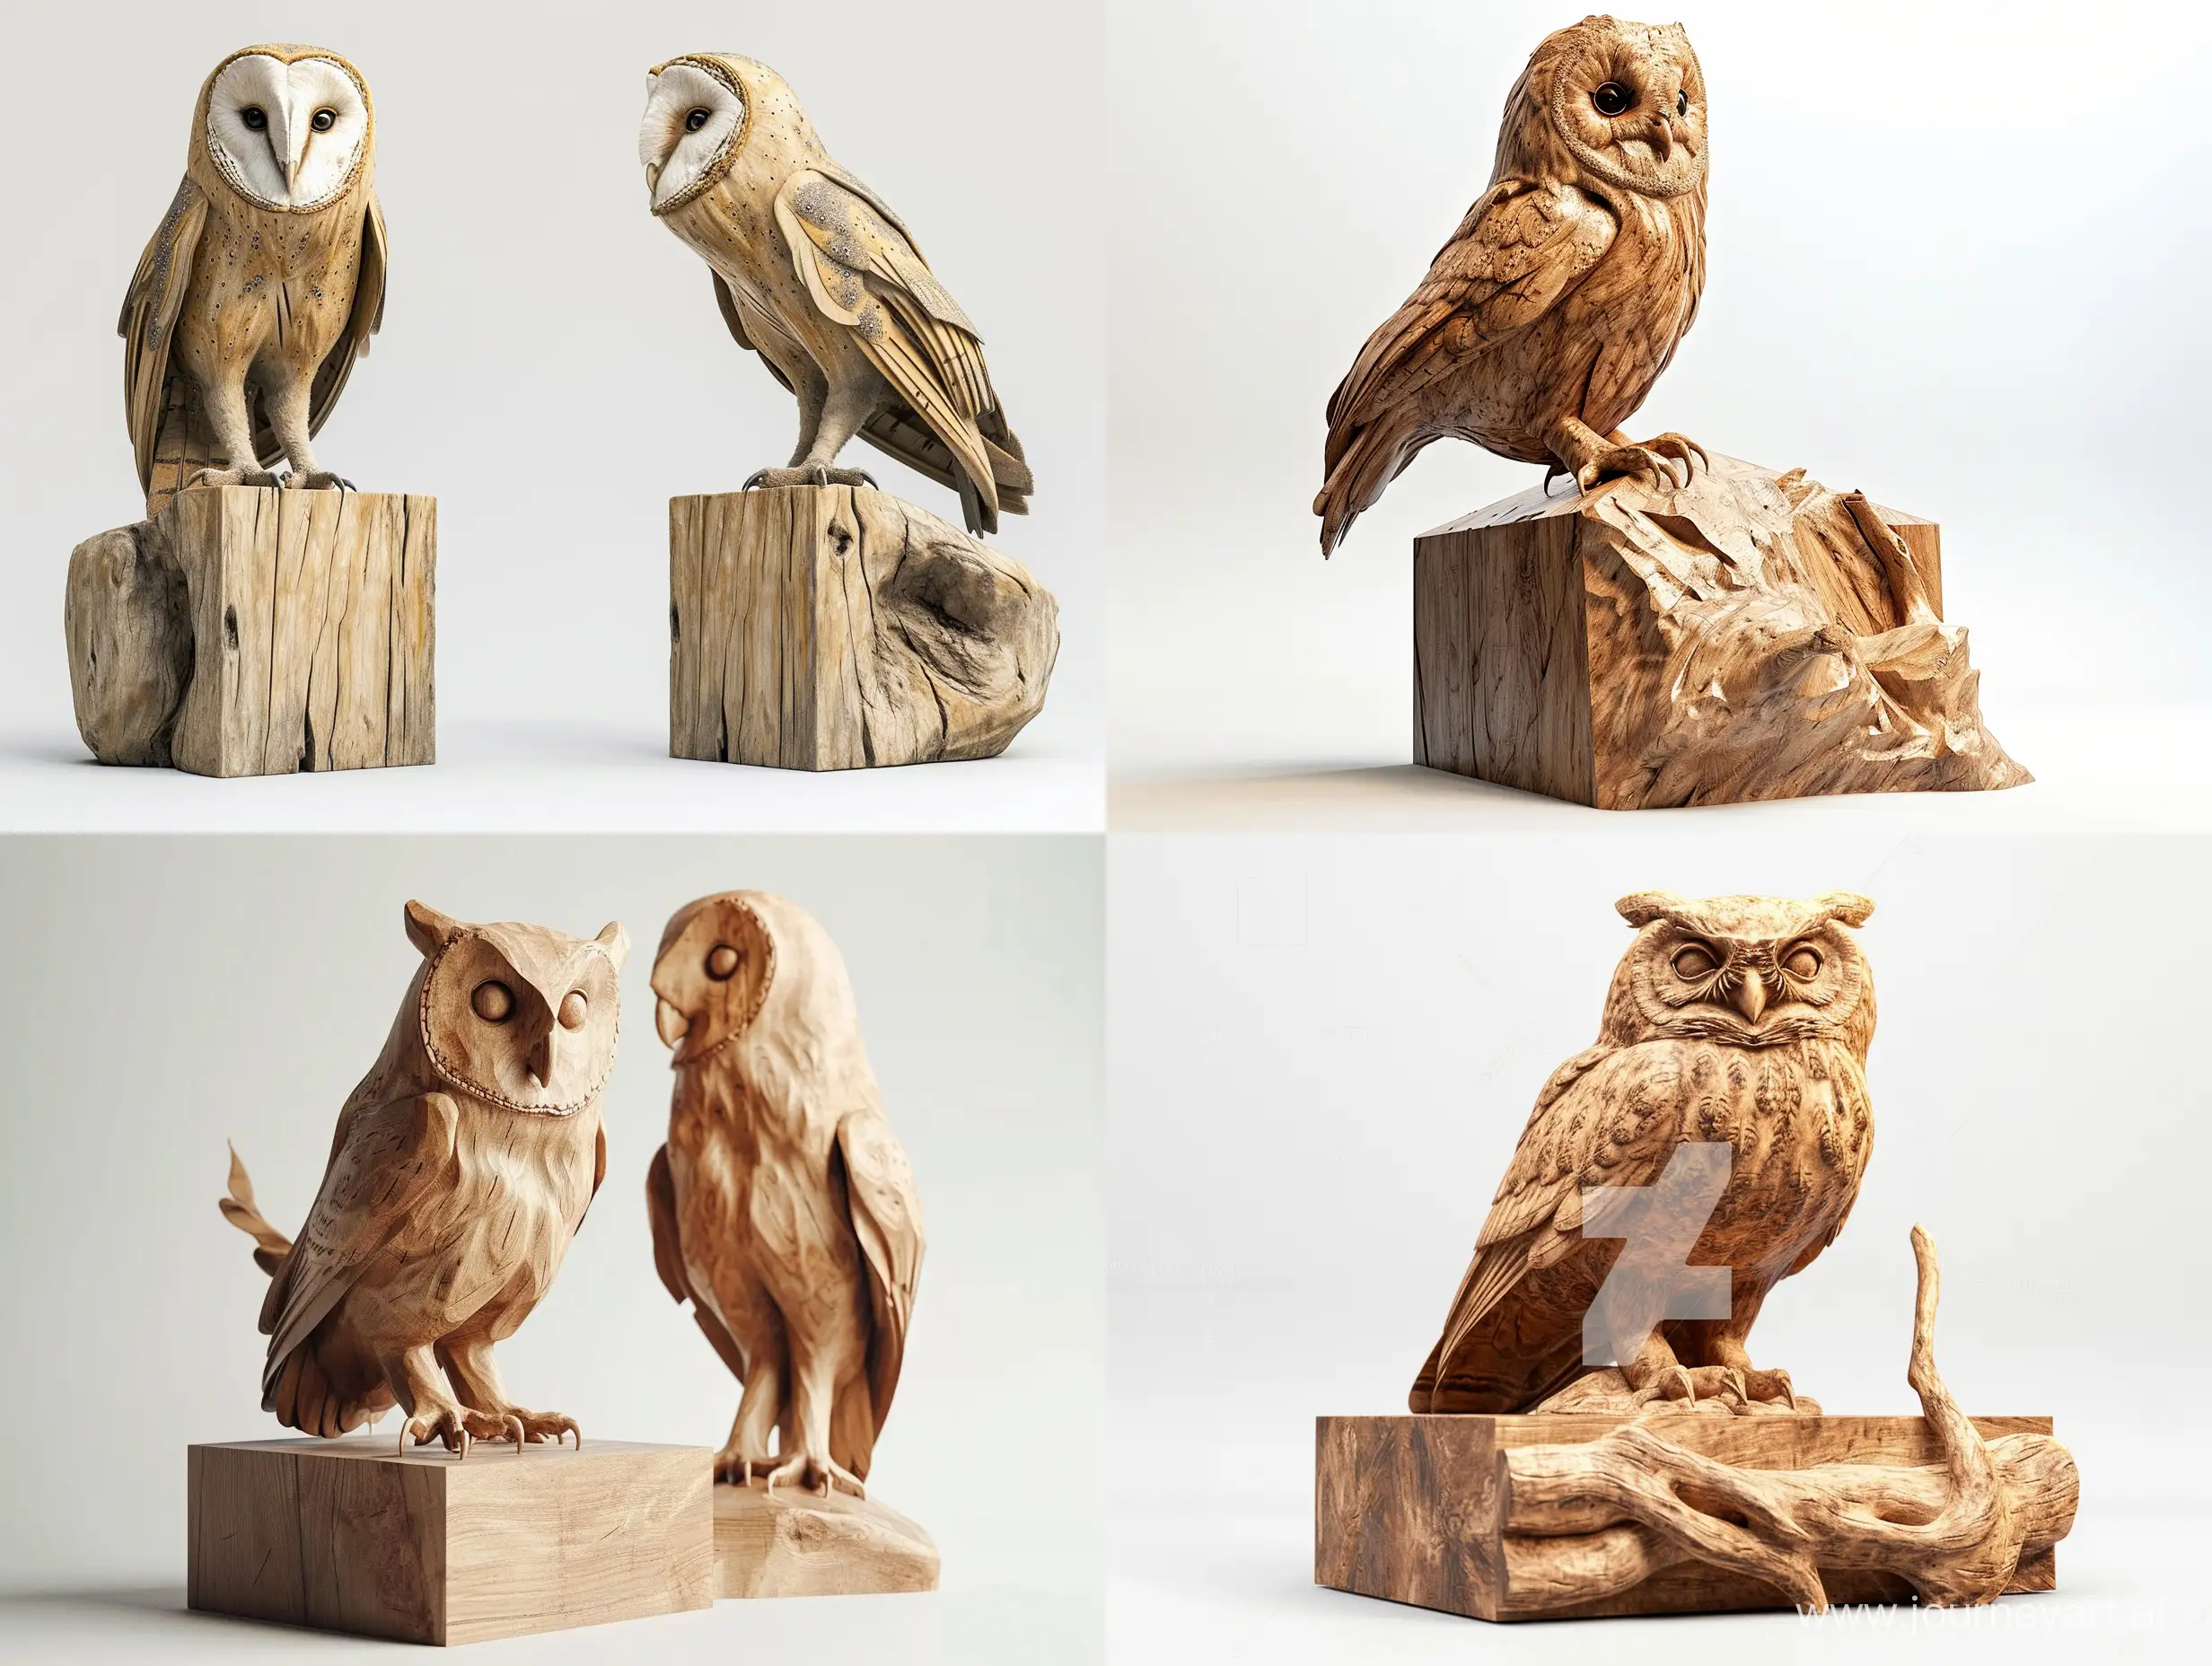 Realistic-Wooden-Owl-Sculpture-on-Large-Cube